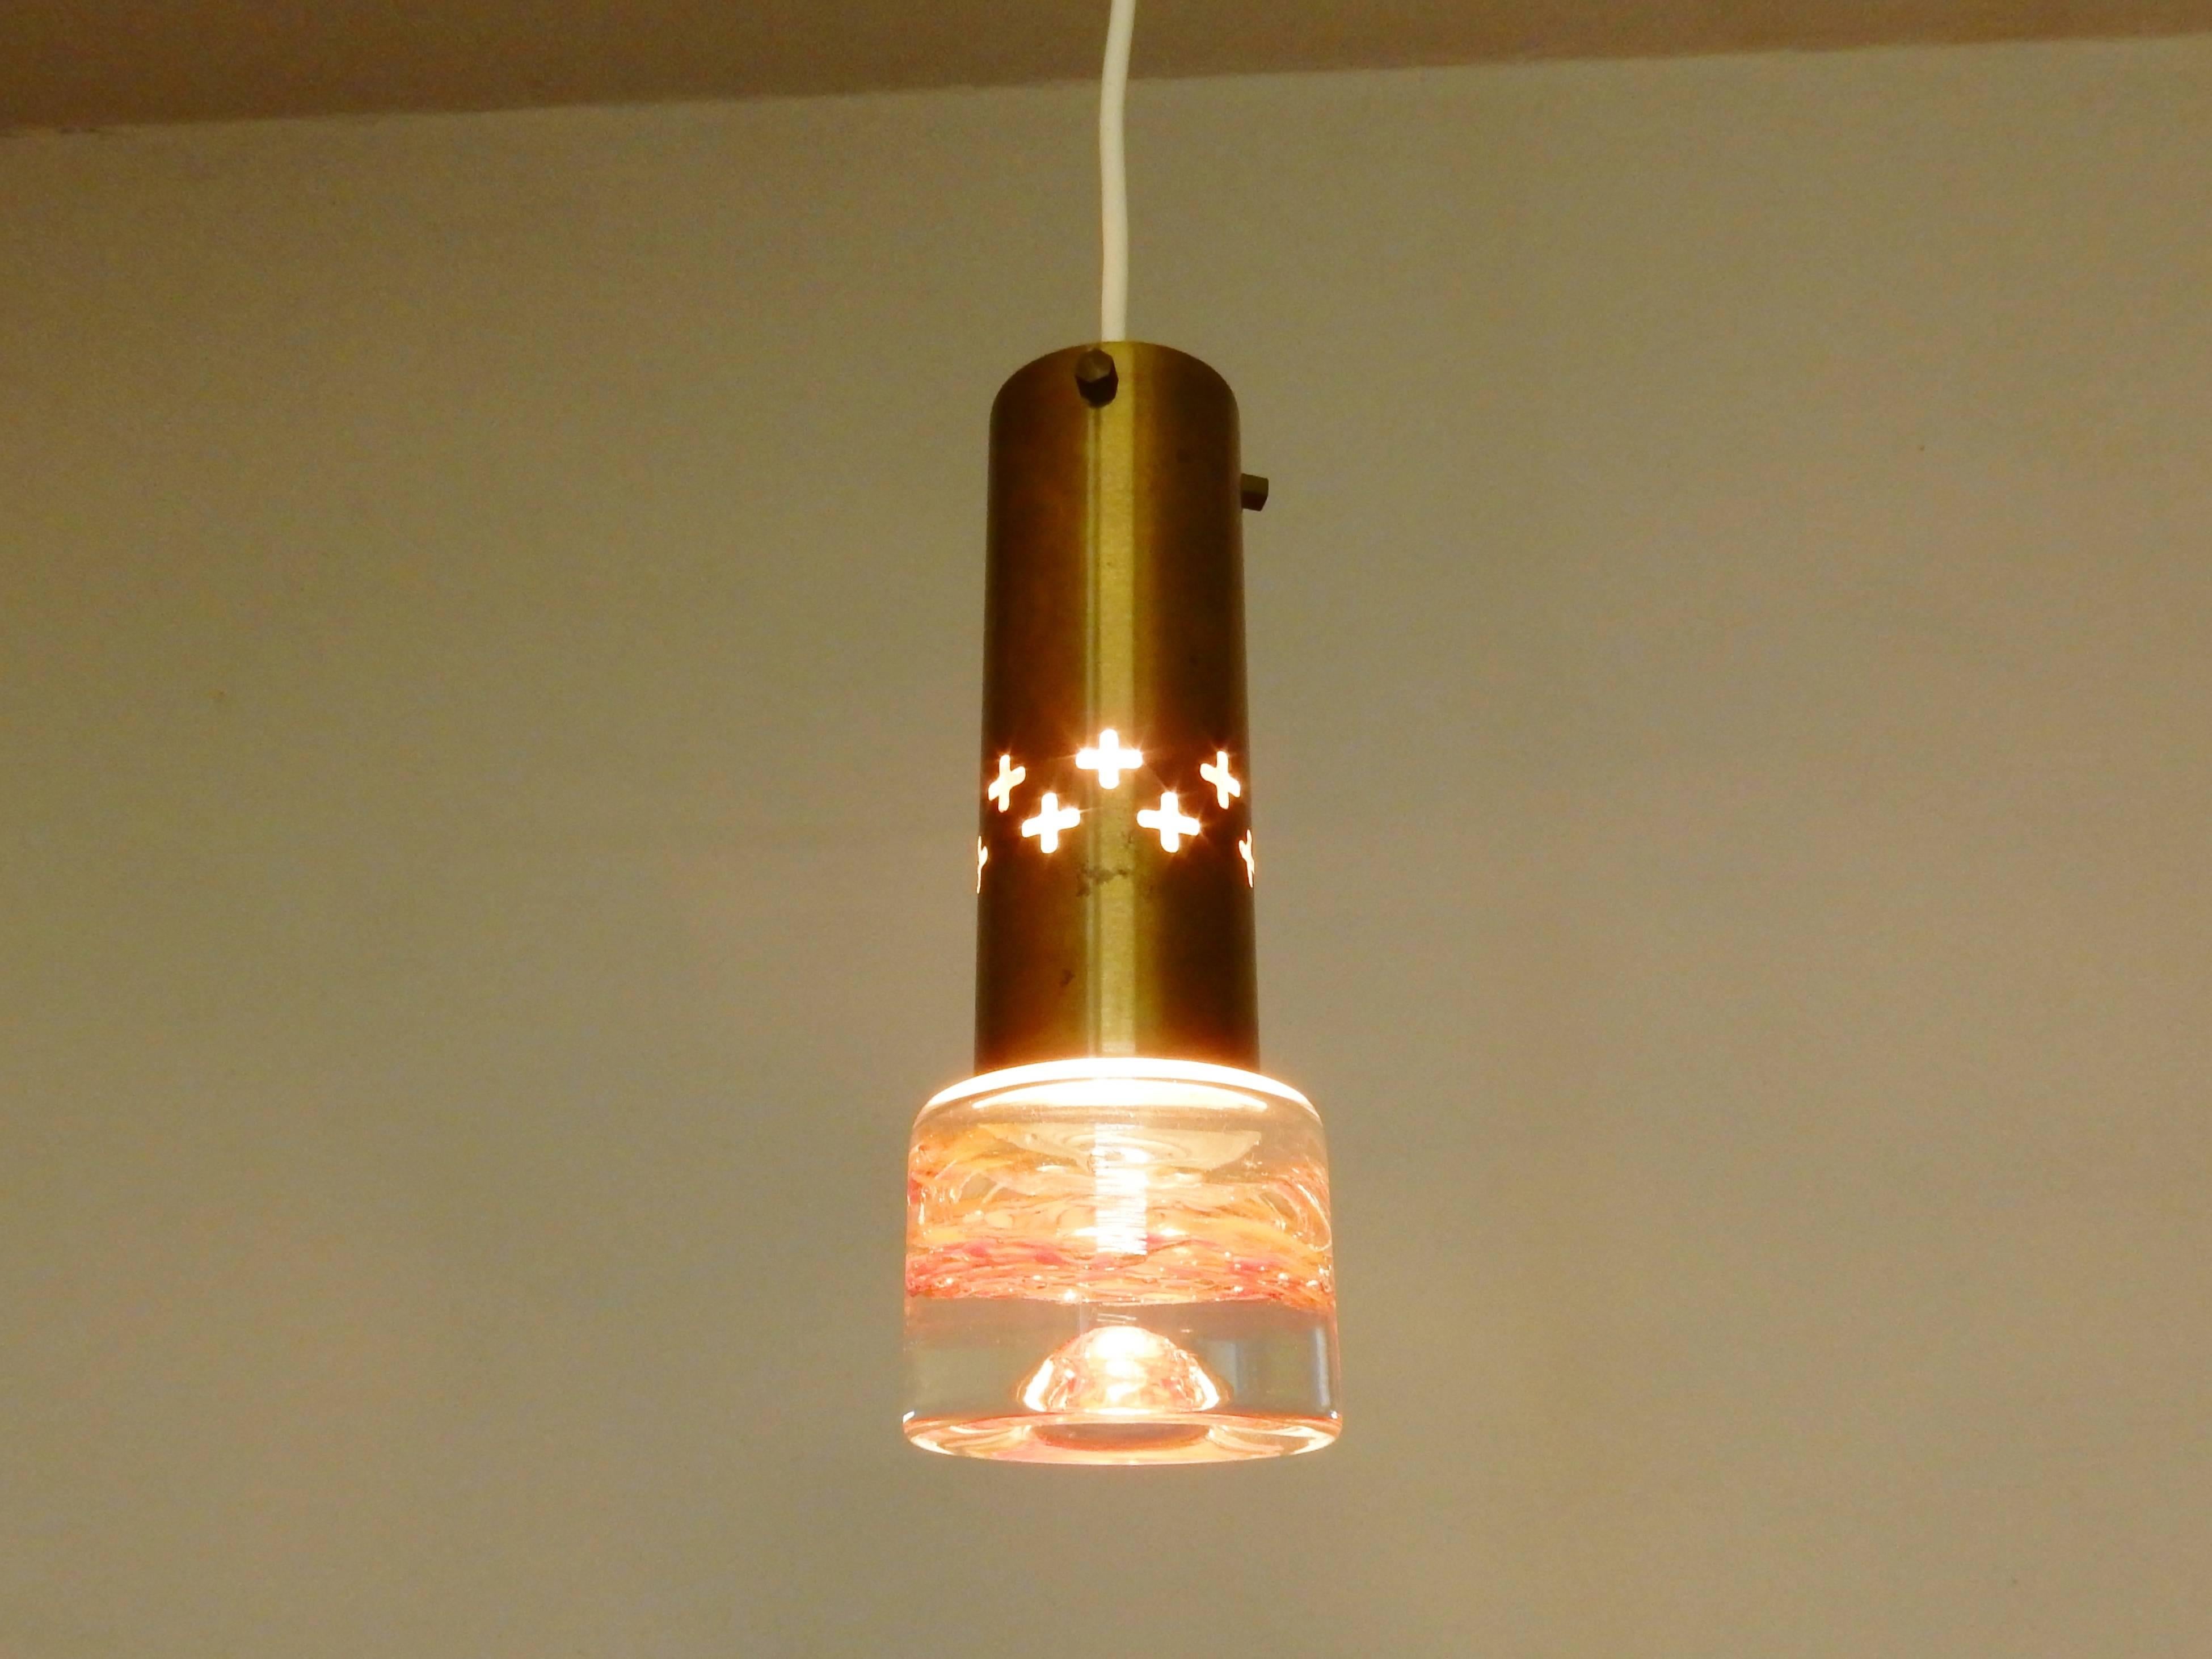 Scandinavian Modern Set of Two Swedish Pendant Lights in Brass and Glass, Sweden, 1960s-1970s For Sale